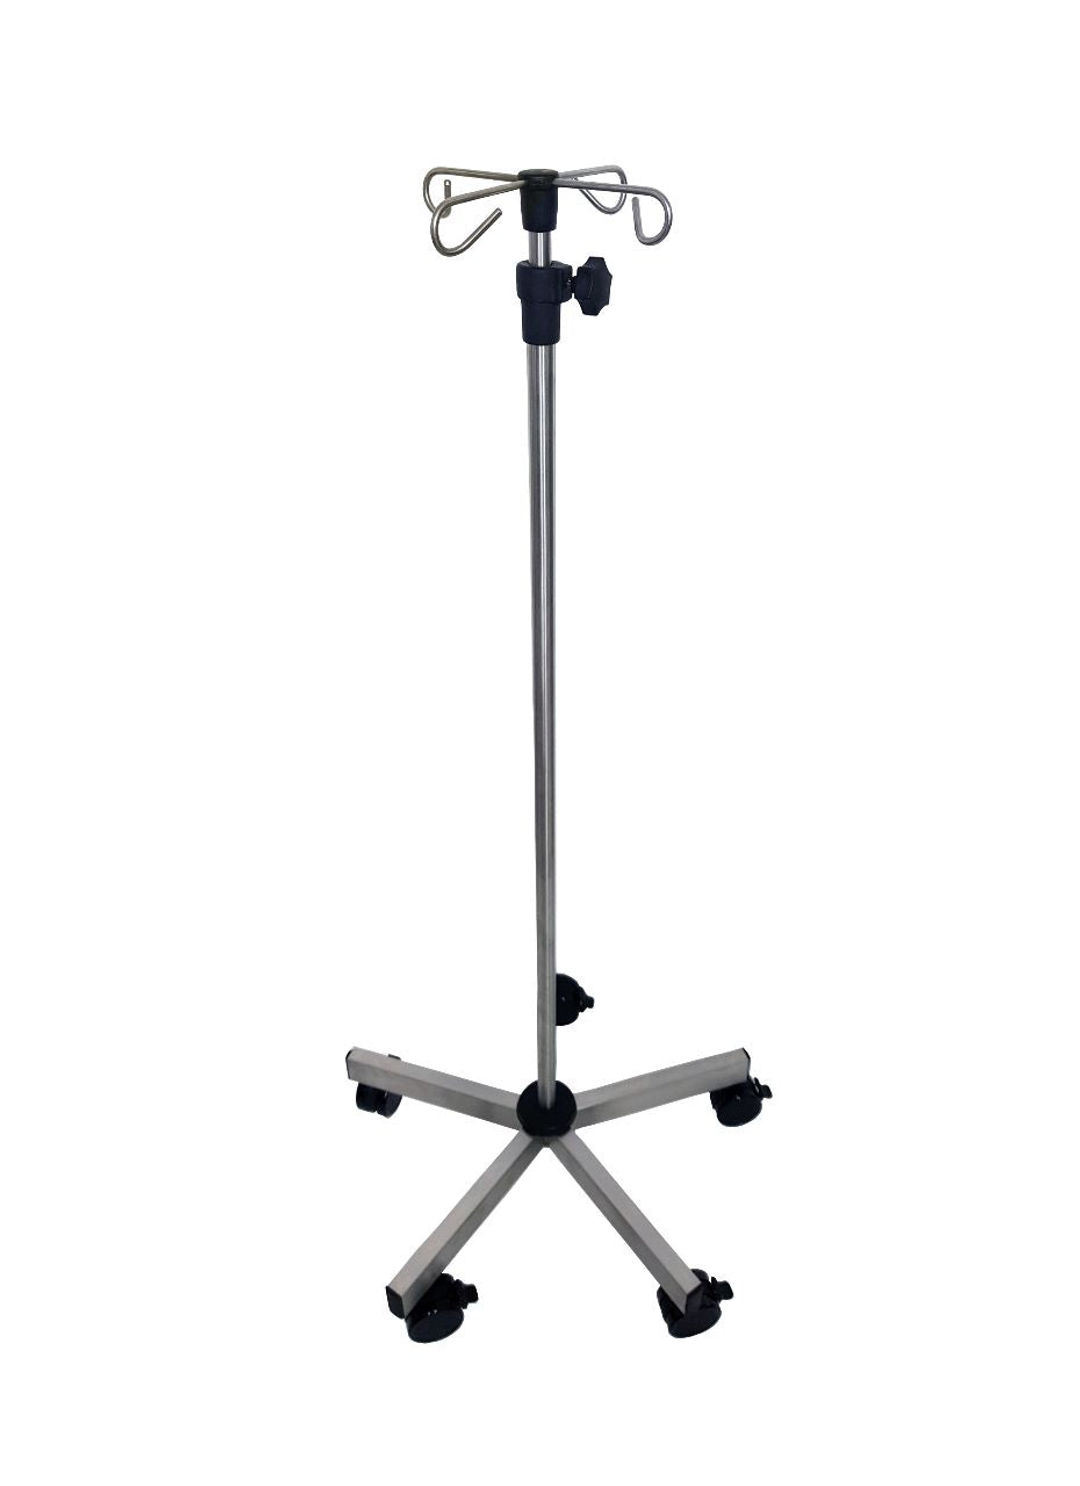 Dp Metallic IV Infusion Stand - IV-2525-L5